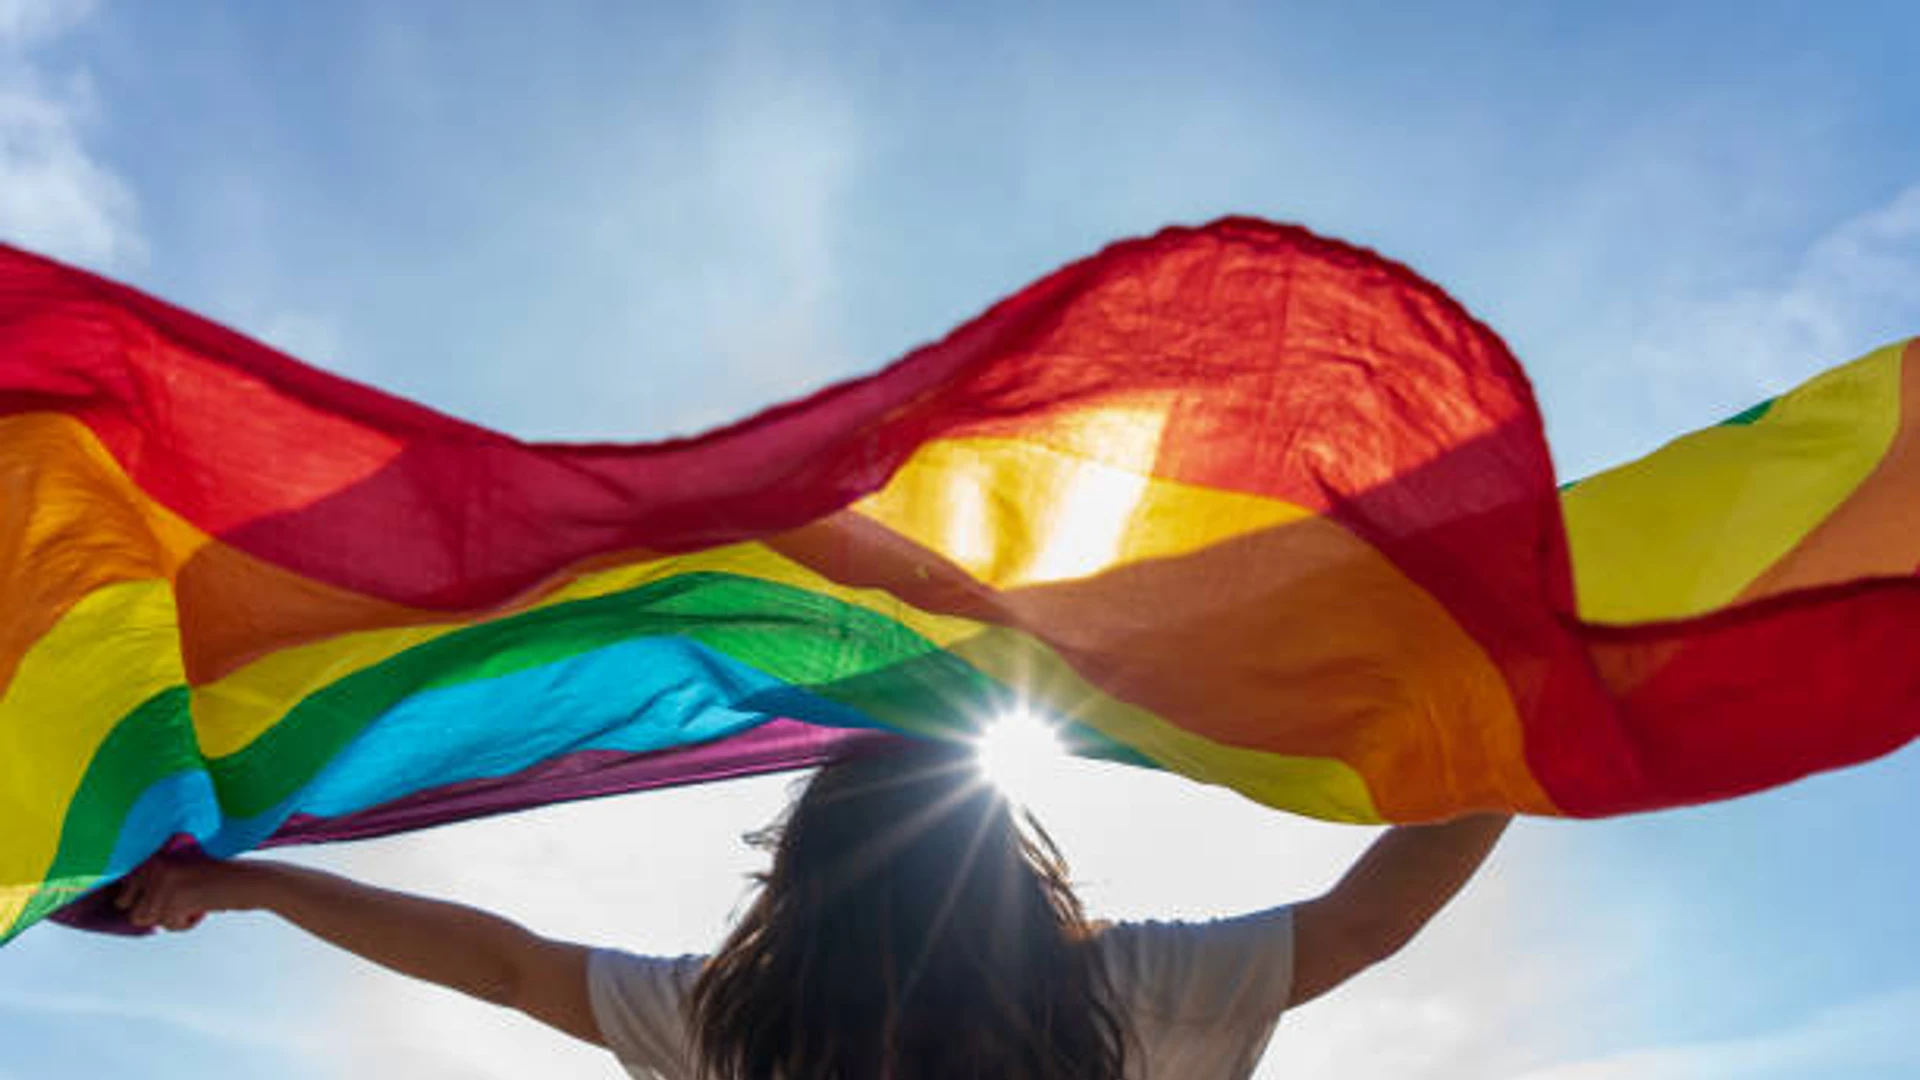 Ban on Conversion Therapy for the LGBTQIA+